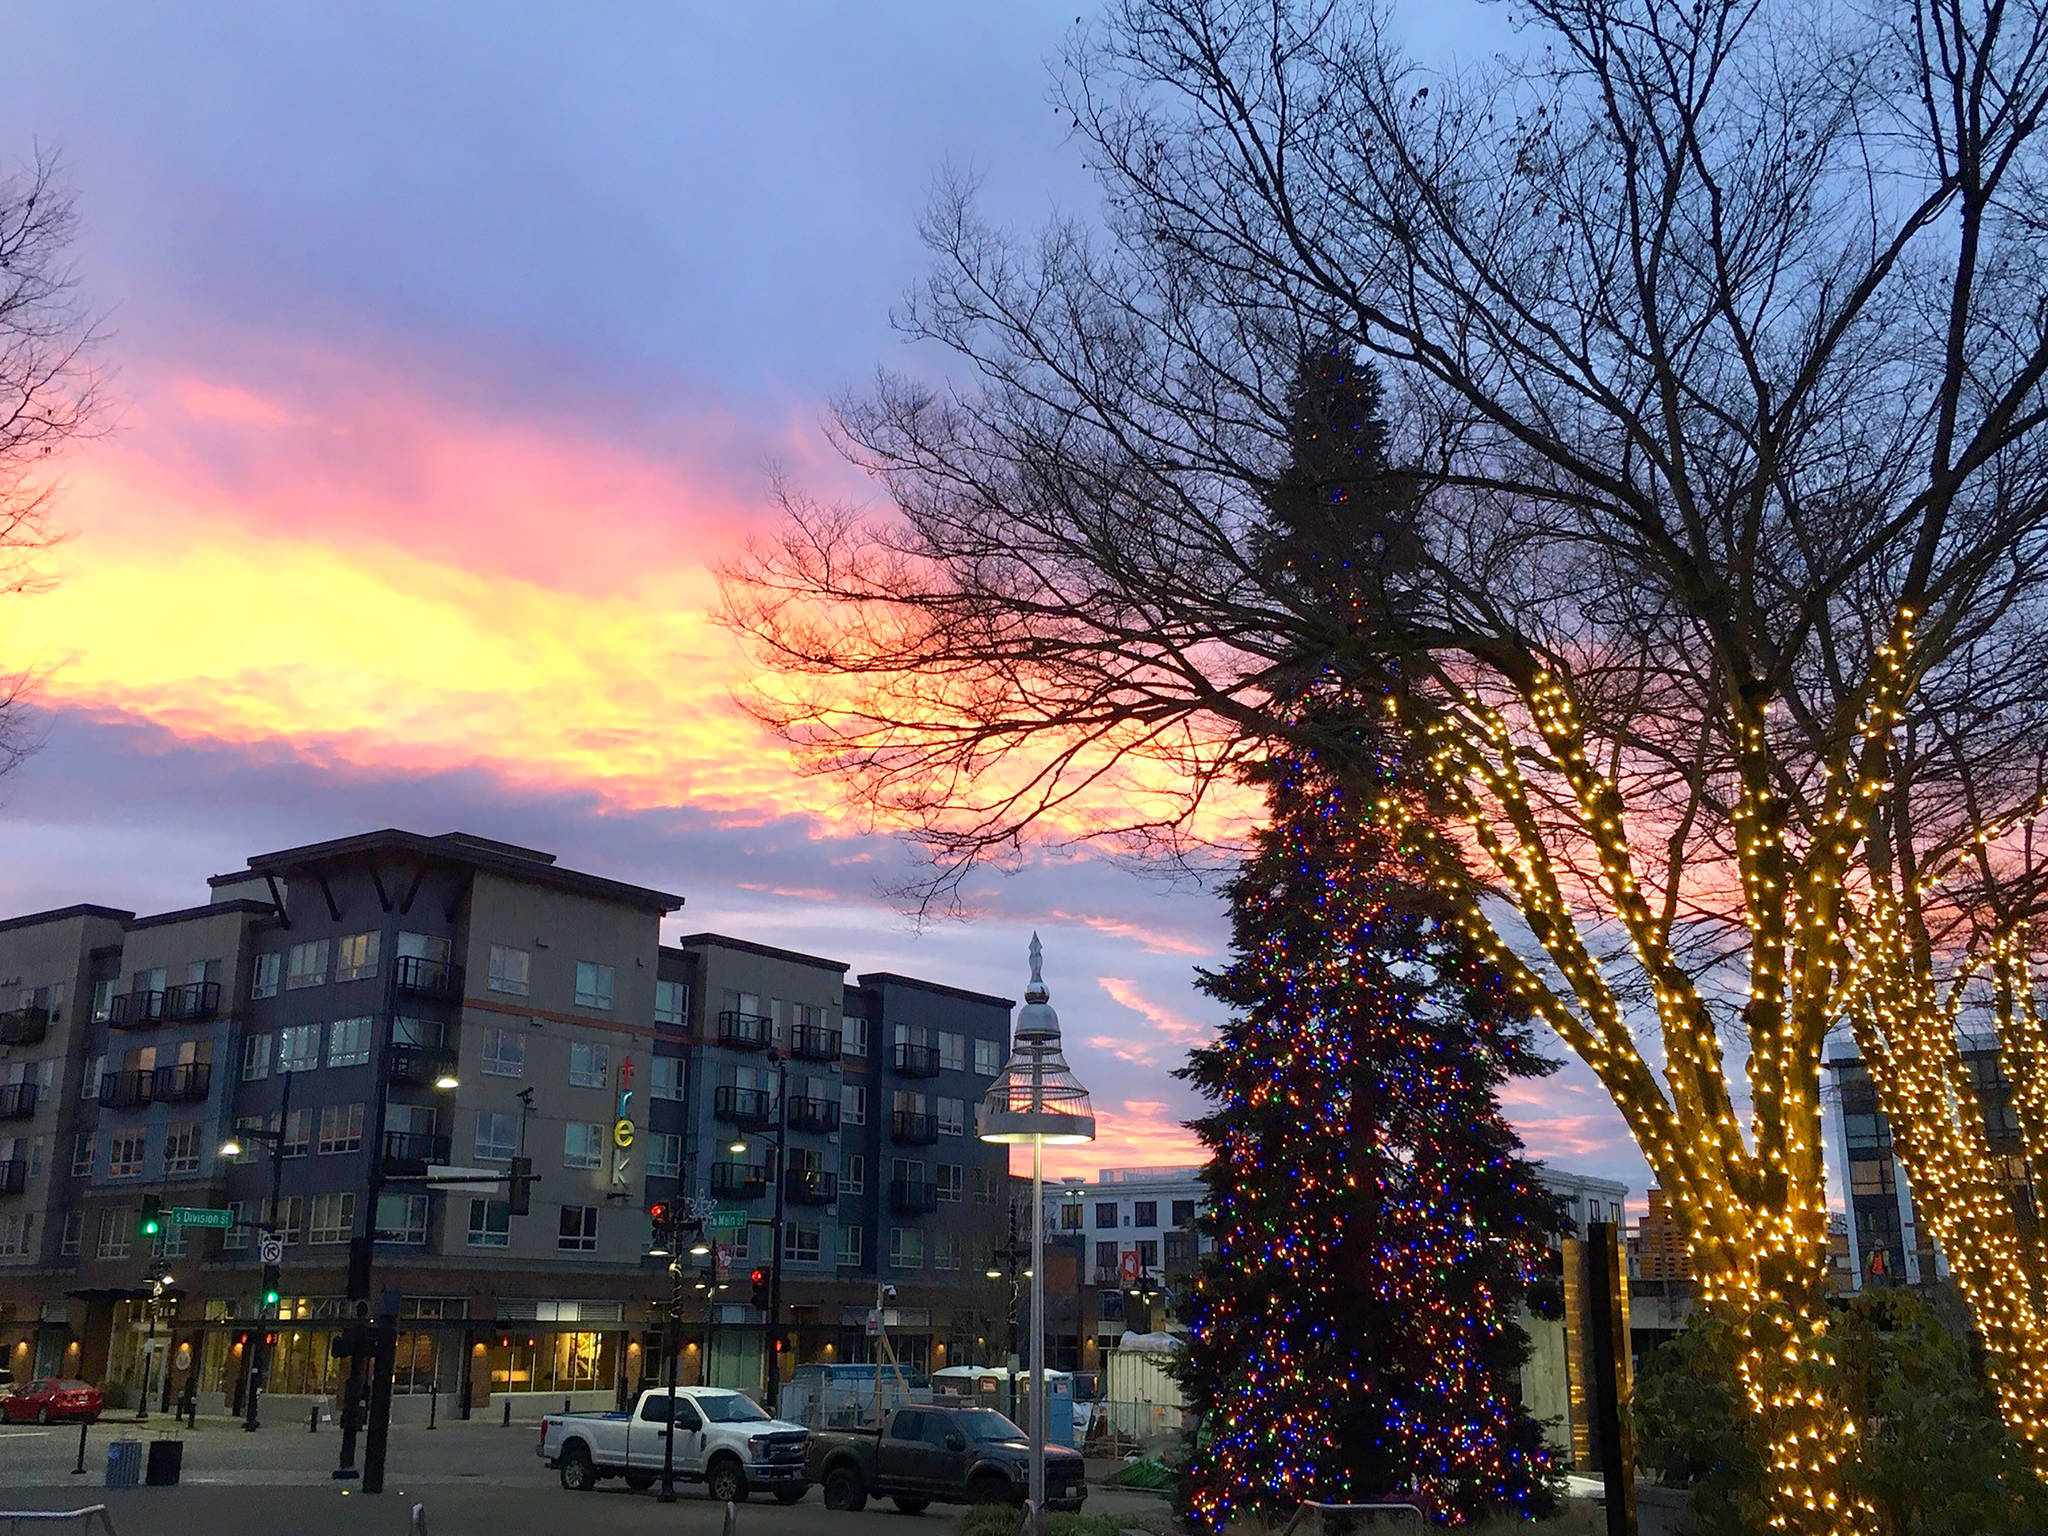 Photo courtesy of Michele Weiss 
The Christmas tree in front of Auburn City Hall greets the dawn of a new day.
Photo courtesy of Michele Weiss.